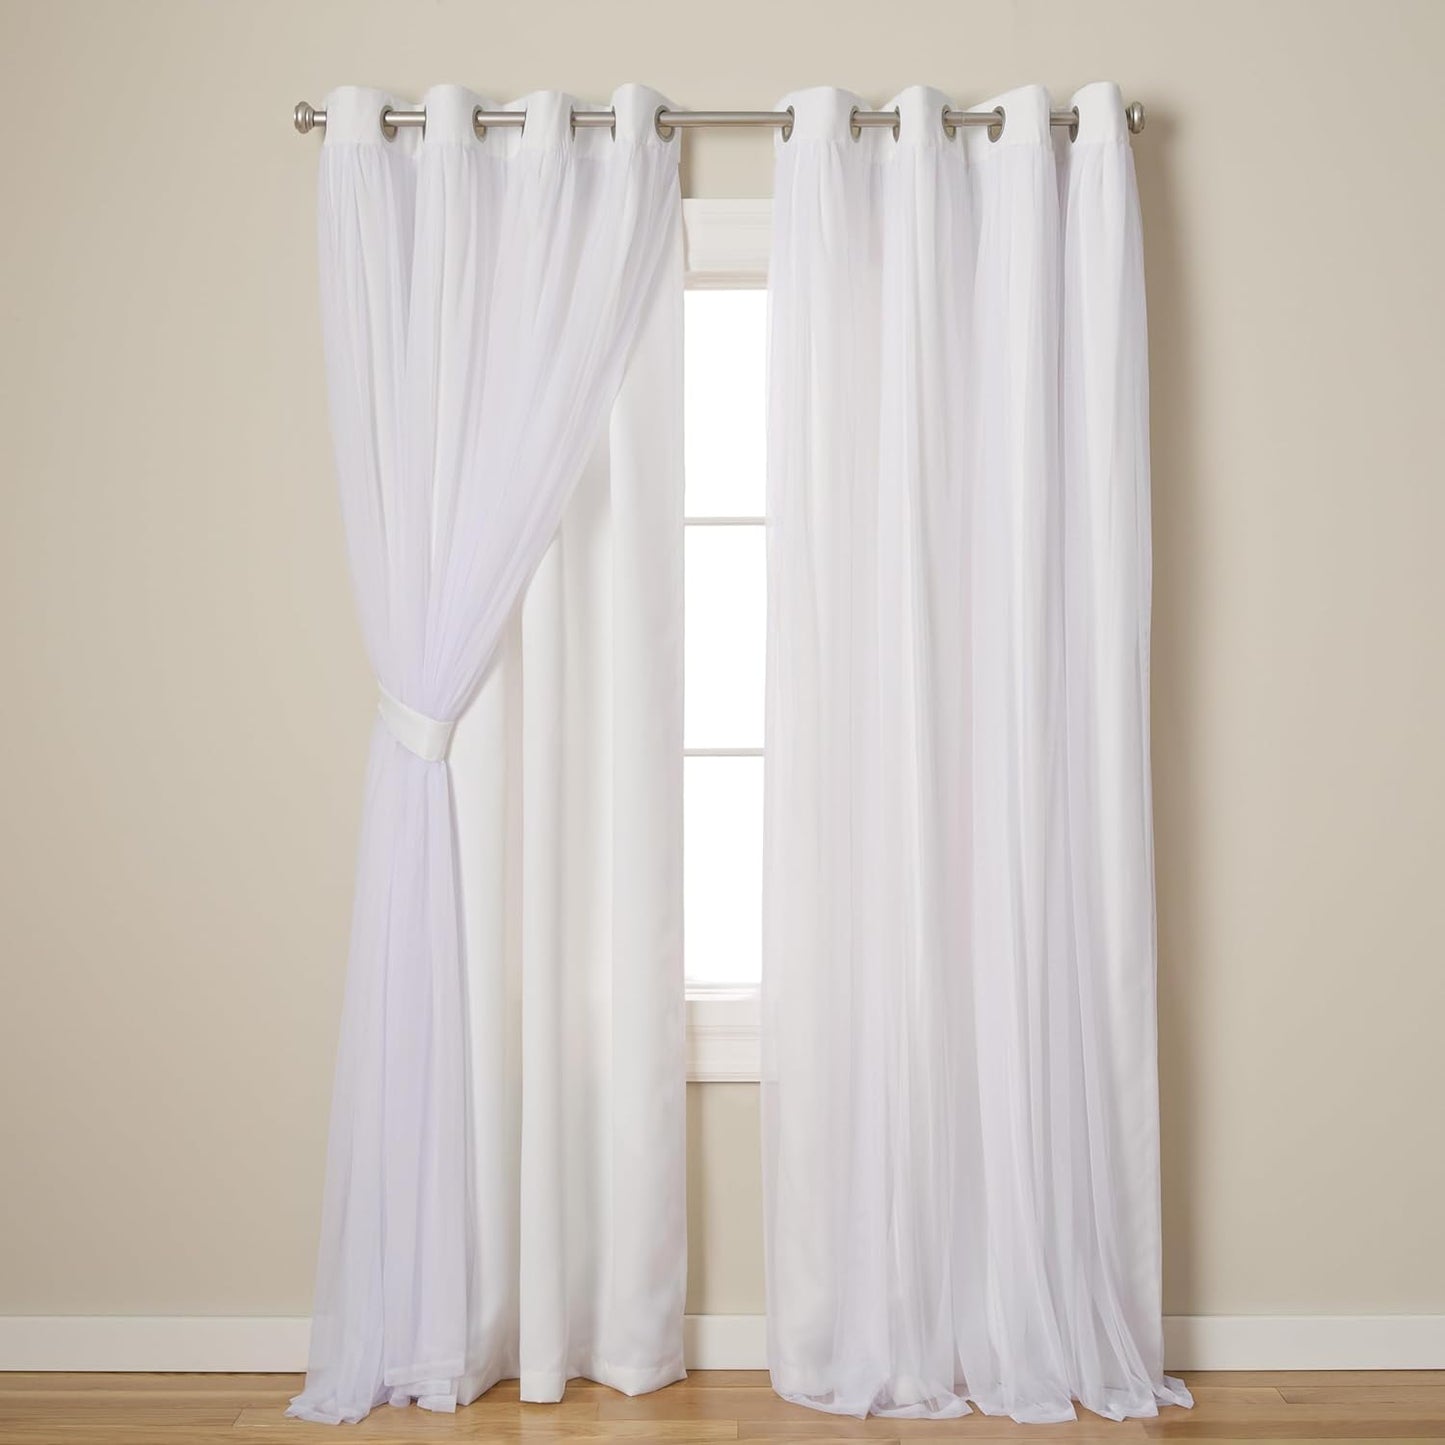 EH8256-09 2-84G Catarina Layered Solid Blackout and Sheer Window Curtain Panel Pair with Grommet Top, 52X84, Winter White, 2 Piece  Exclusive Home Curtains   